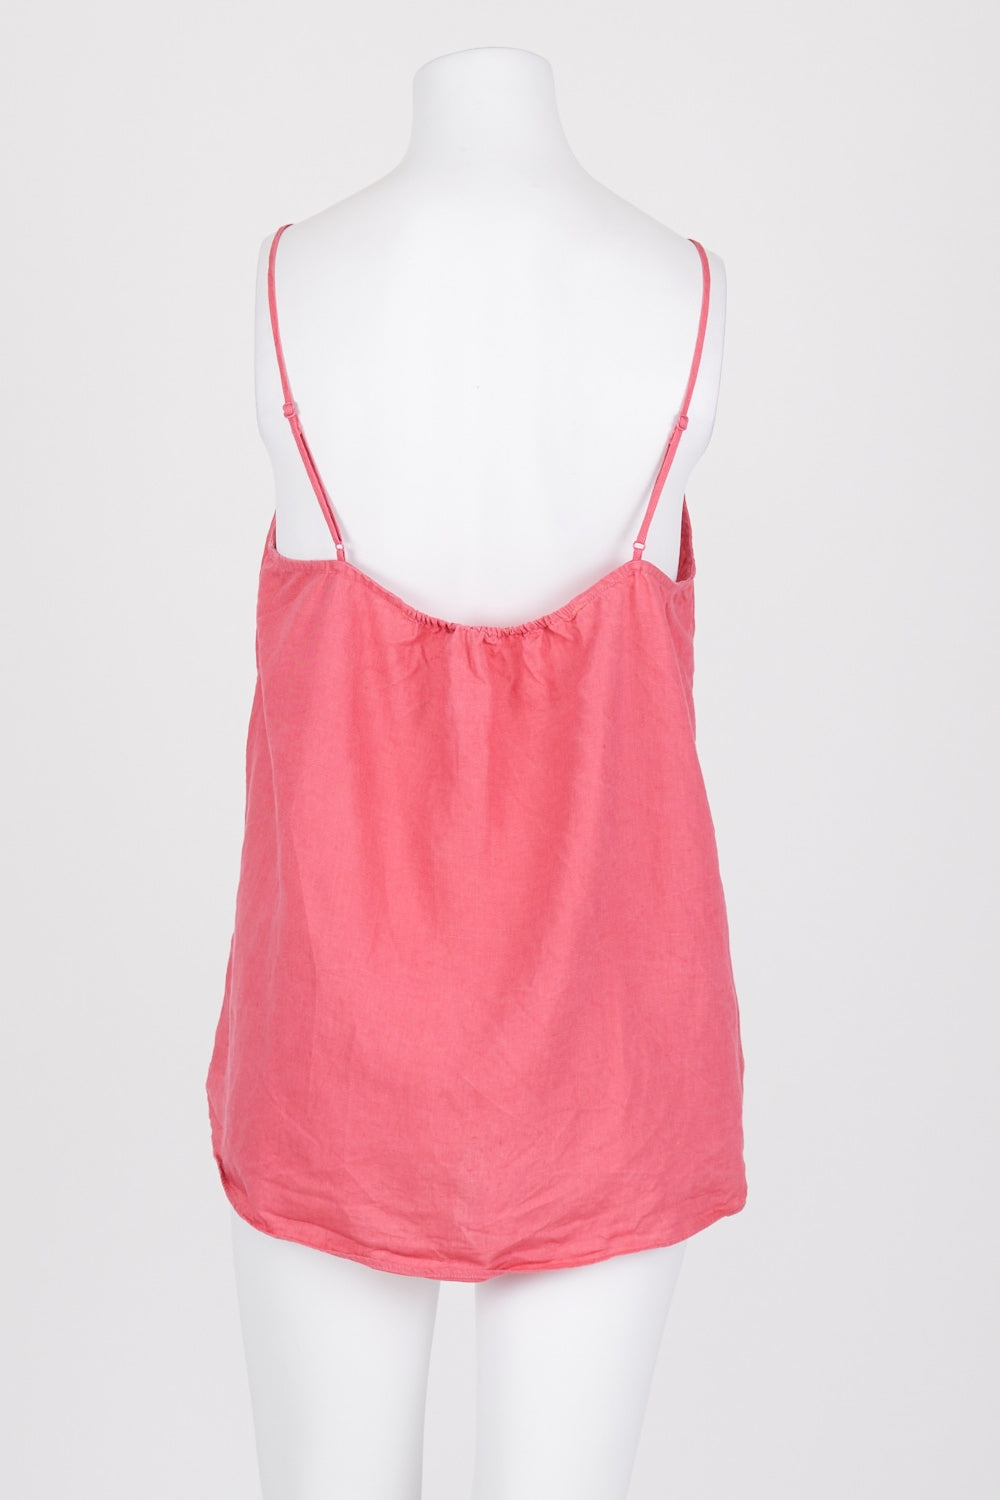 Country Road Pink 100% French Linen Top 12